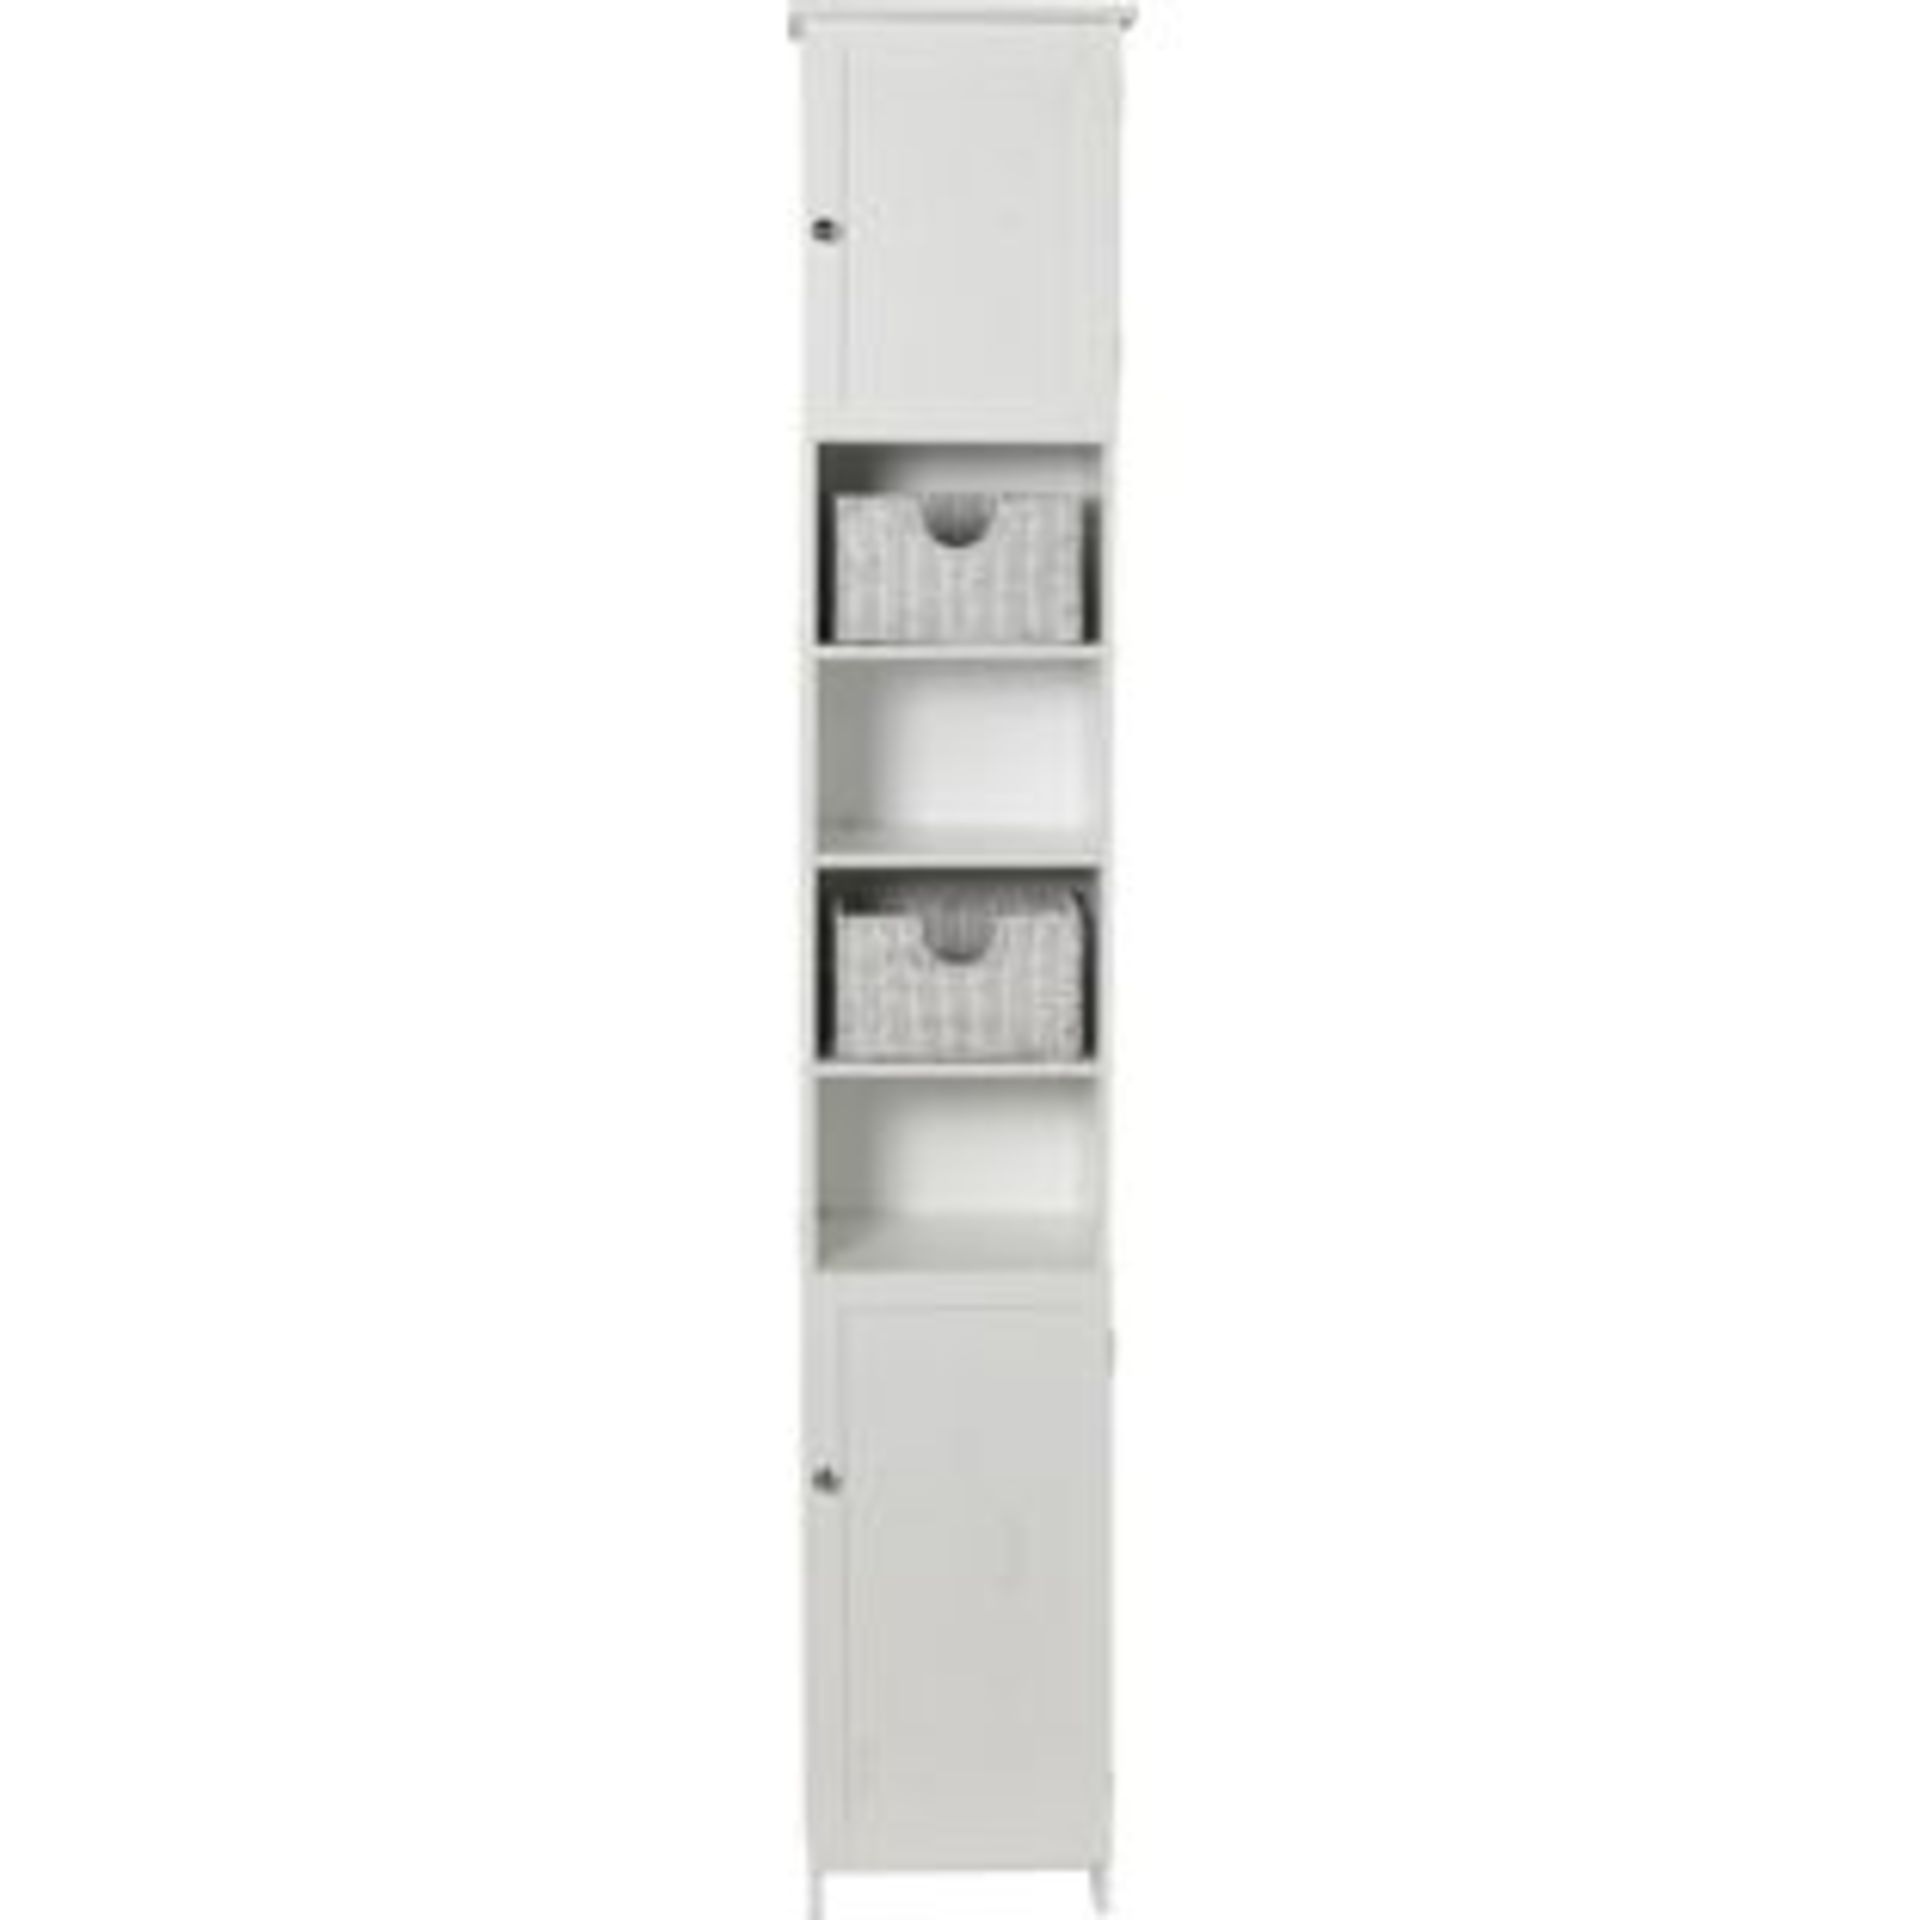 HOME Manhattan Tall Cabinet - White. Size H190, W33, D32cm. Boxed & Unchecked. Please Note